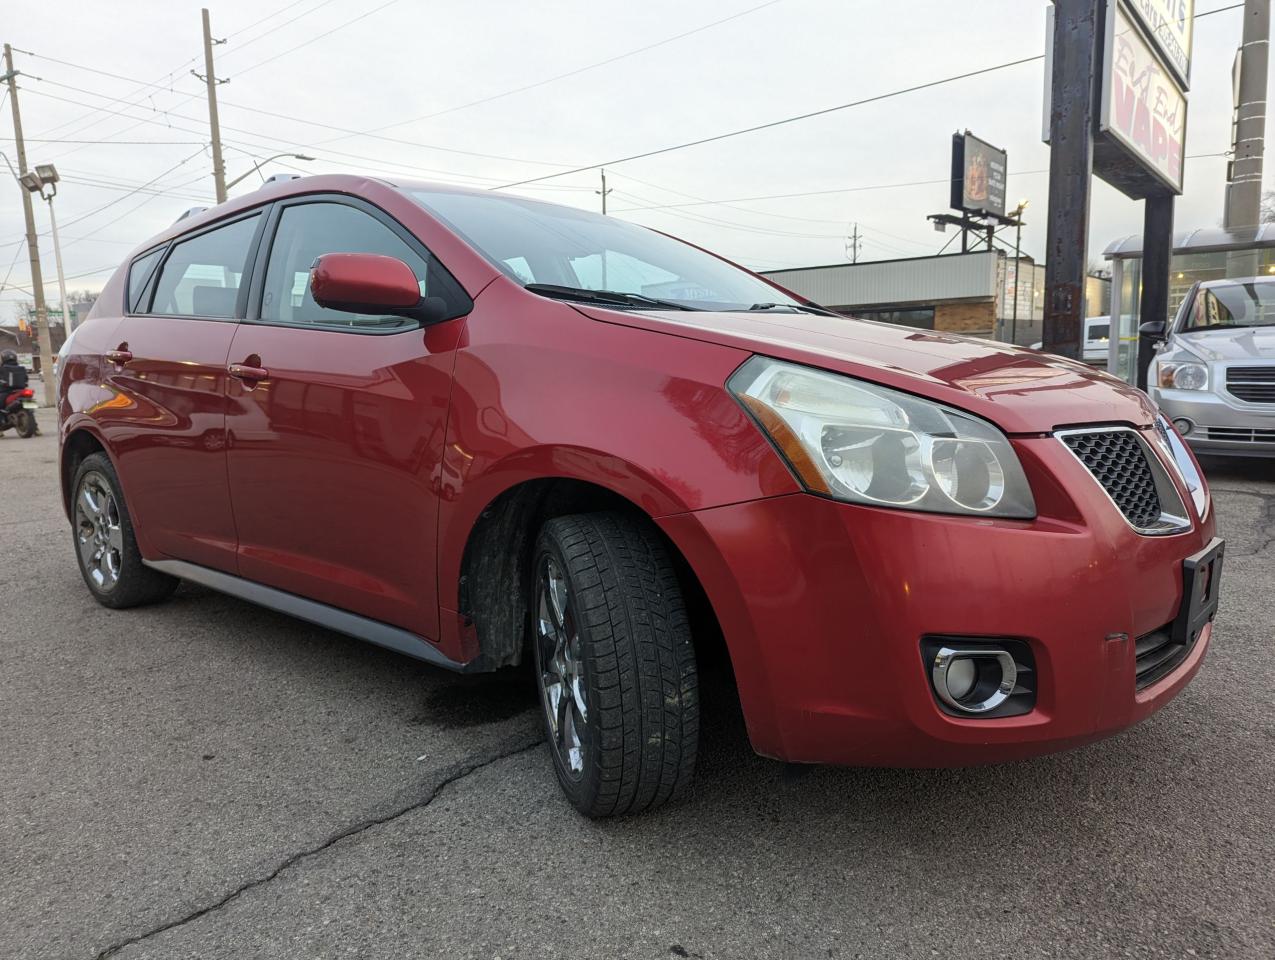 2009 Pontiac Vibe AWD *Drives Excellent/Free Winter Tires On Rims* - Photo #13